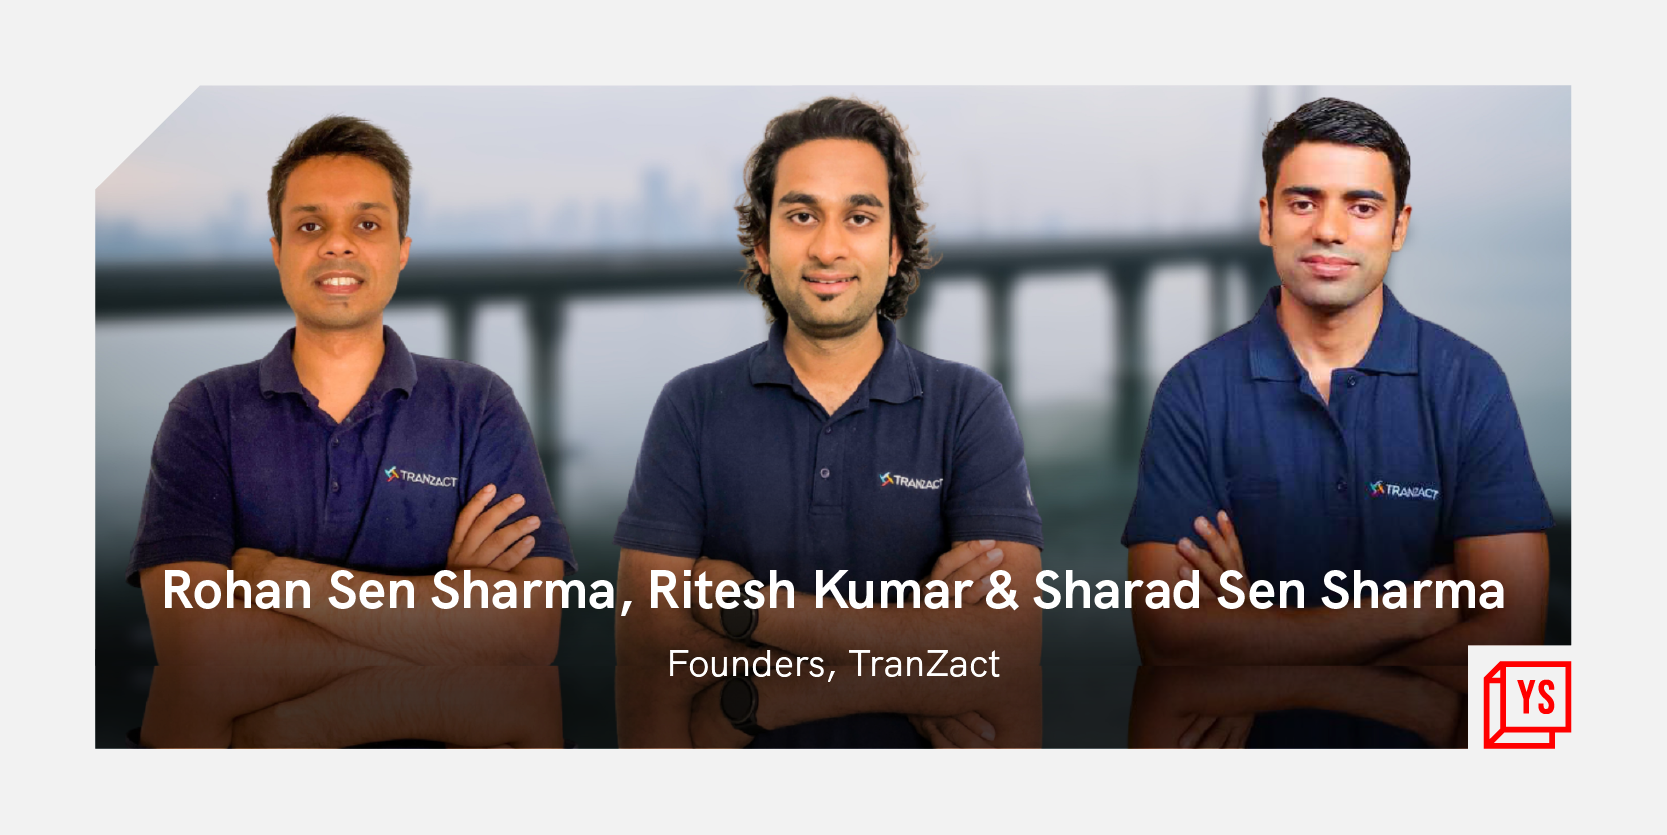 [Funding alert] SaaS startup for SMEs, TranZact raises $7M in Series A round